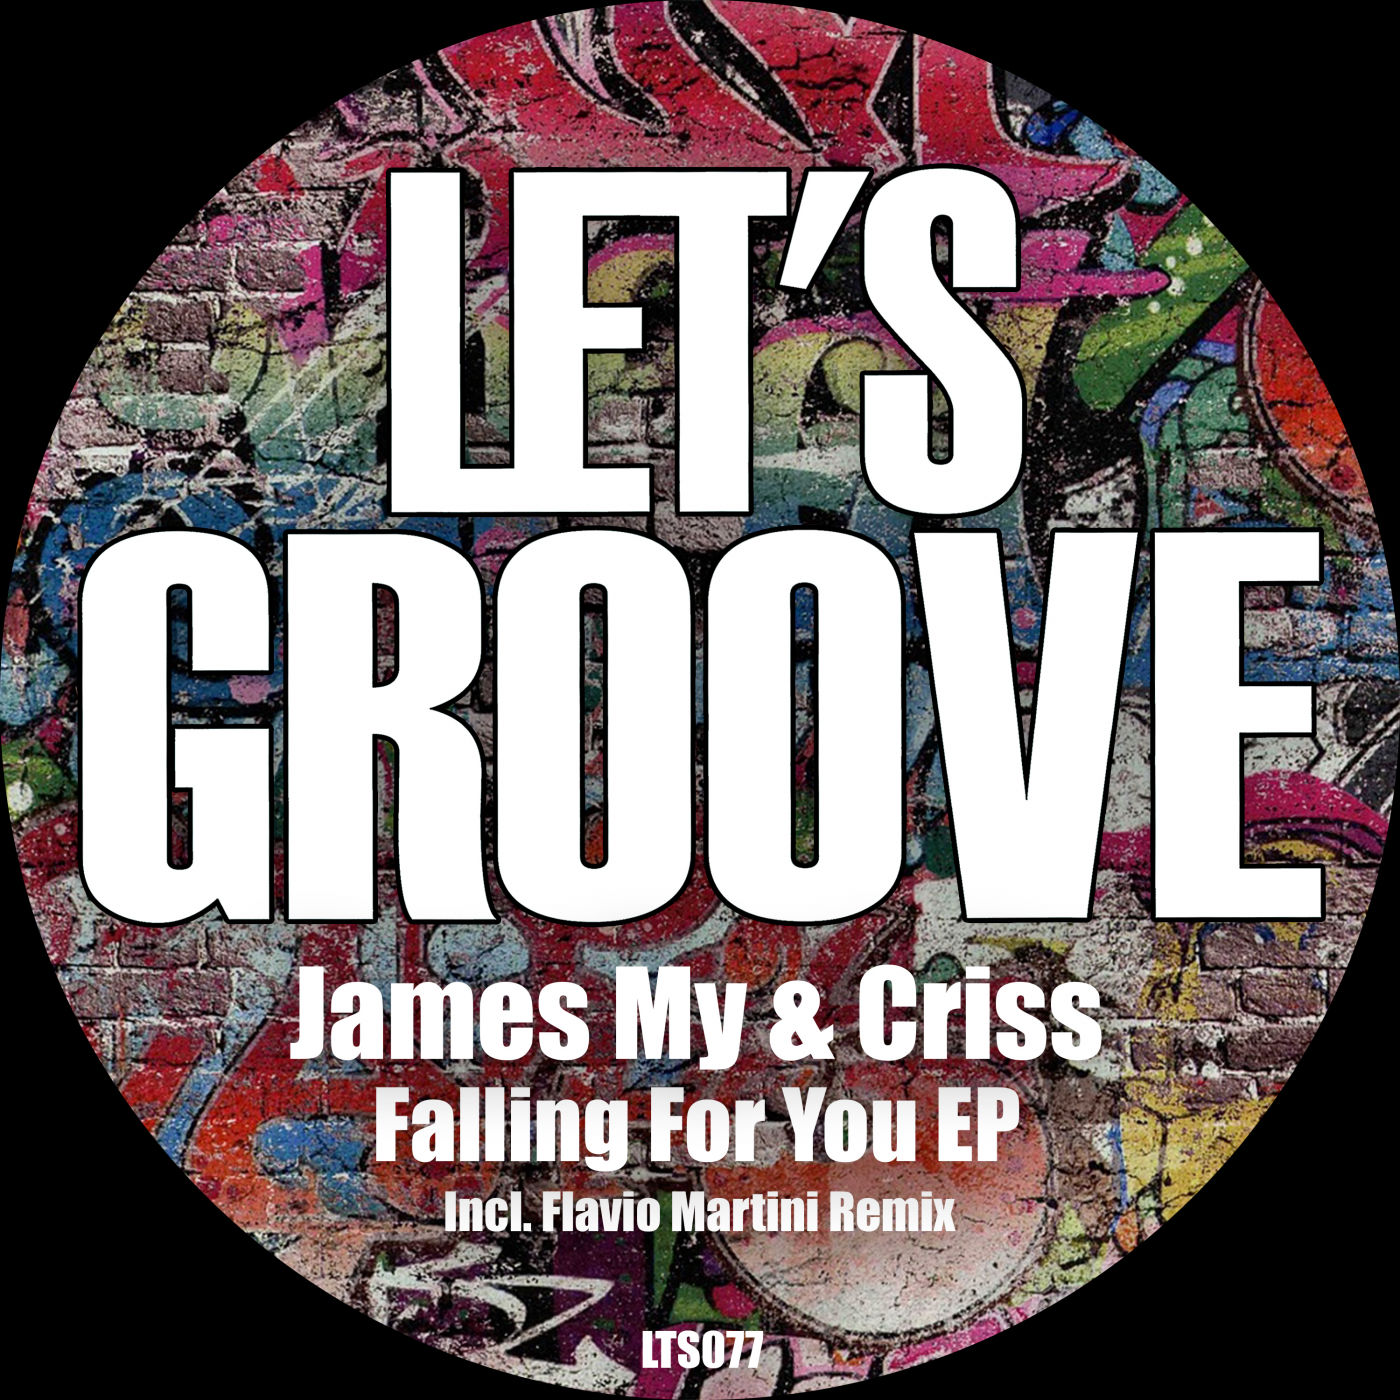 James My & Criss - Falling For You EP / Let's Groove